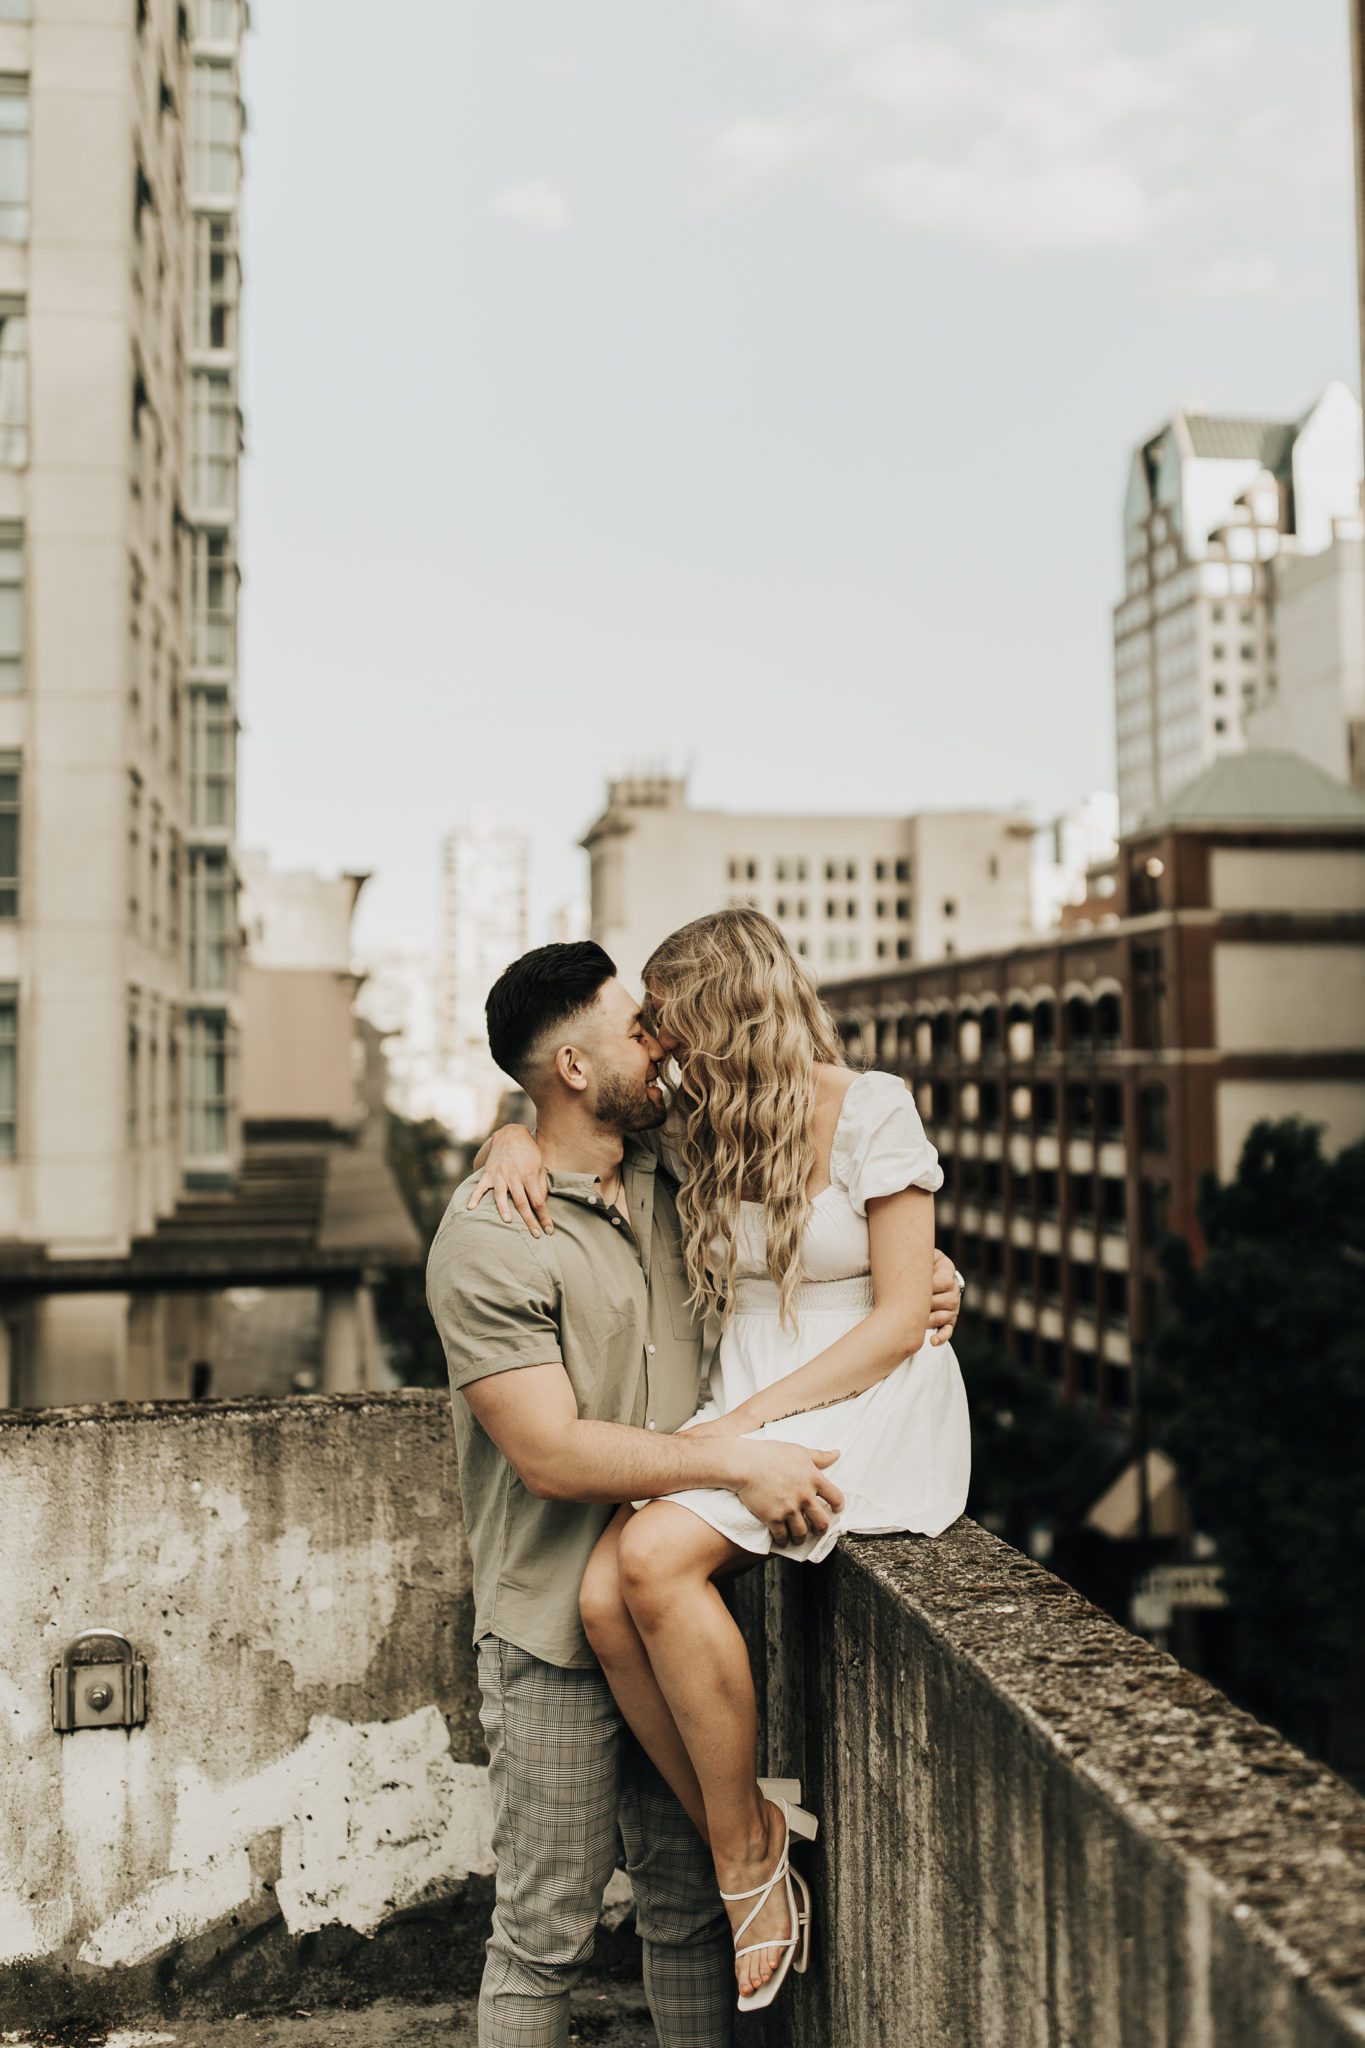 Picture perfect downtown Vancouver engagement session with an outfit change